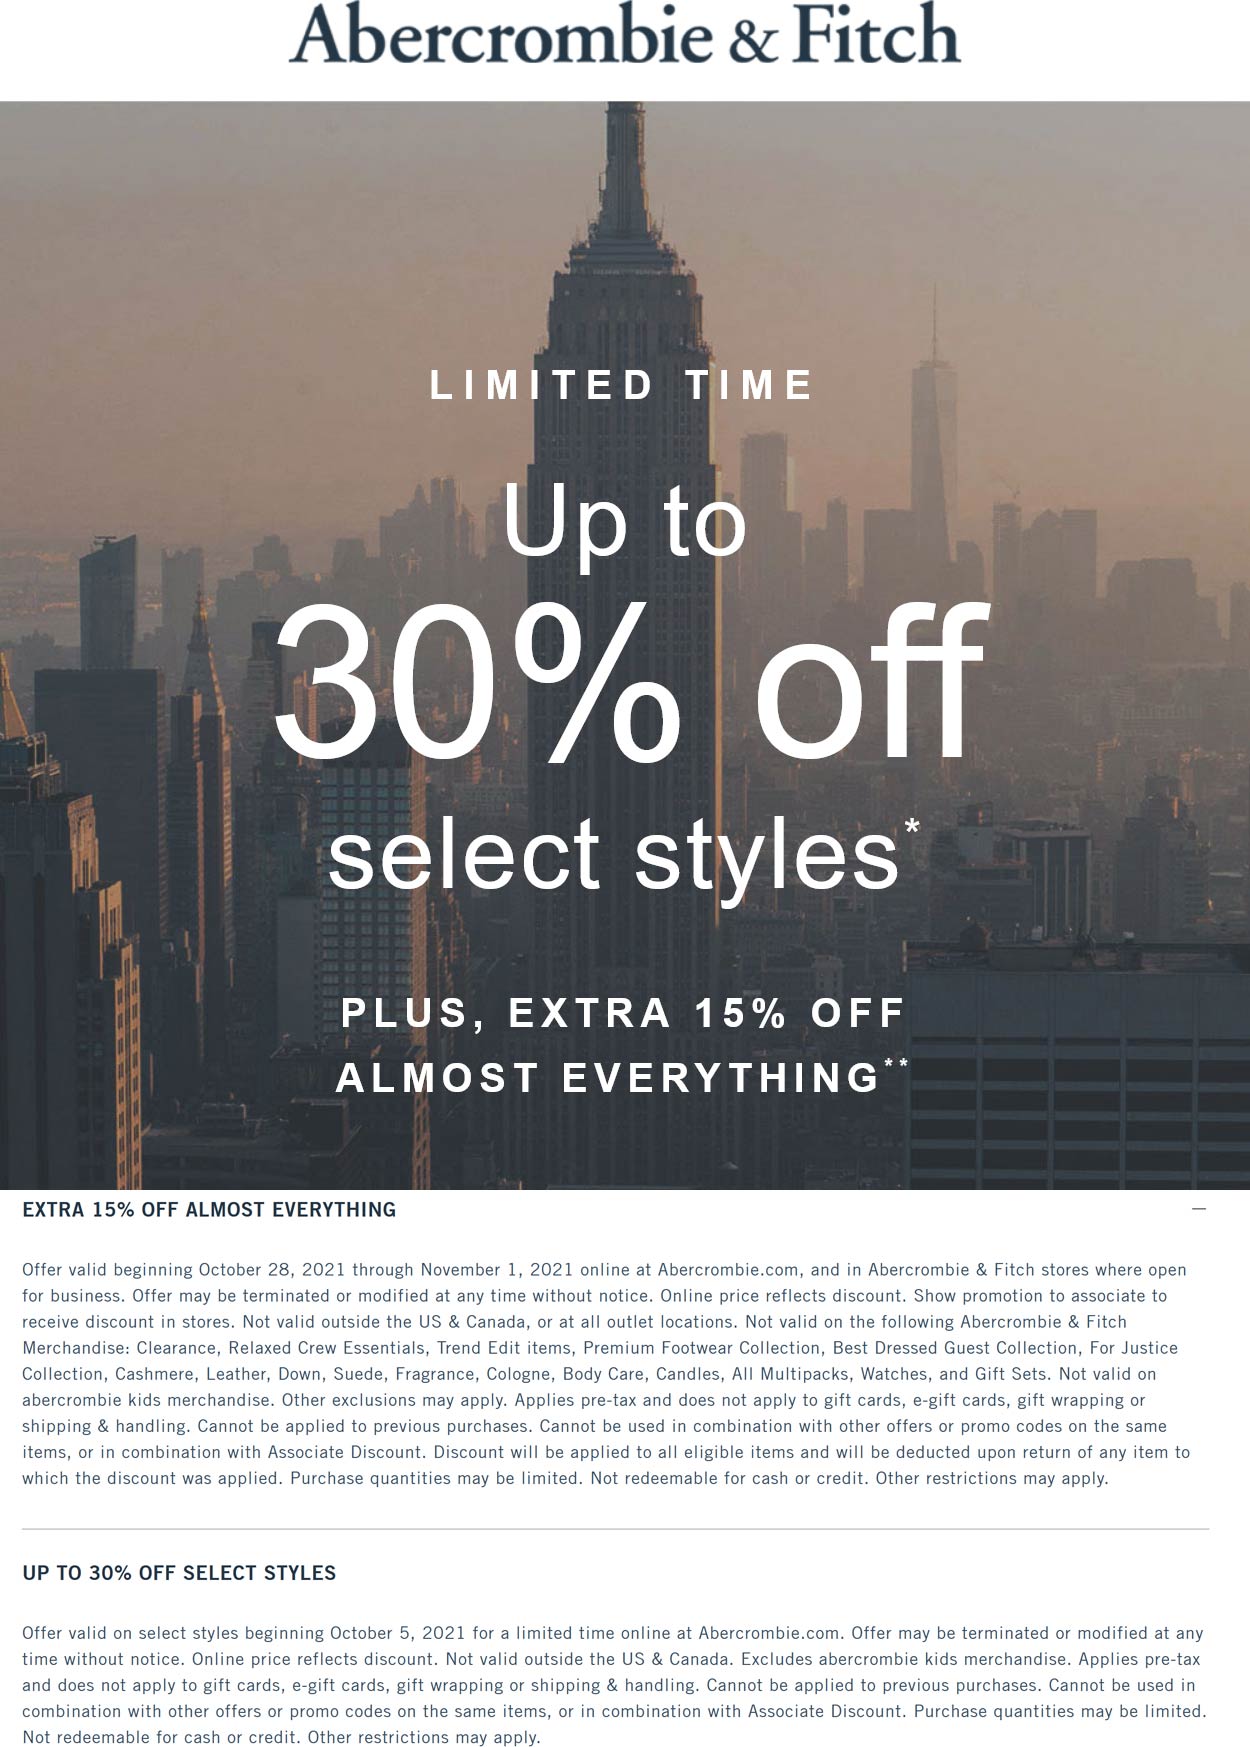 Abercrombie & Fitch stores Coupon  15-30% off everything at Abercrombie & Fitch, ditto online #abercrombiefitch 